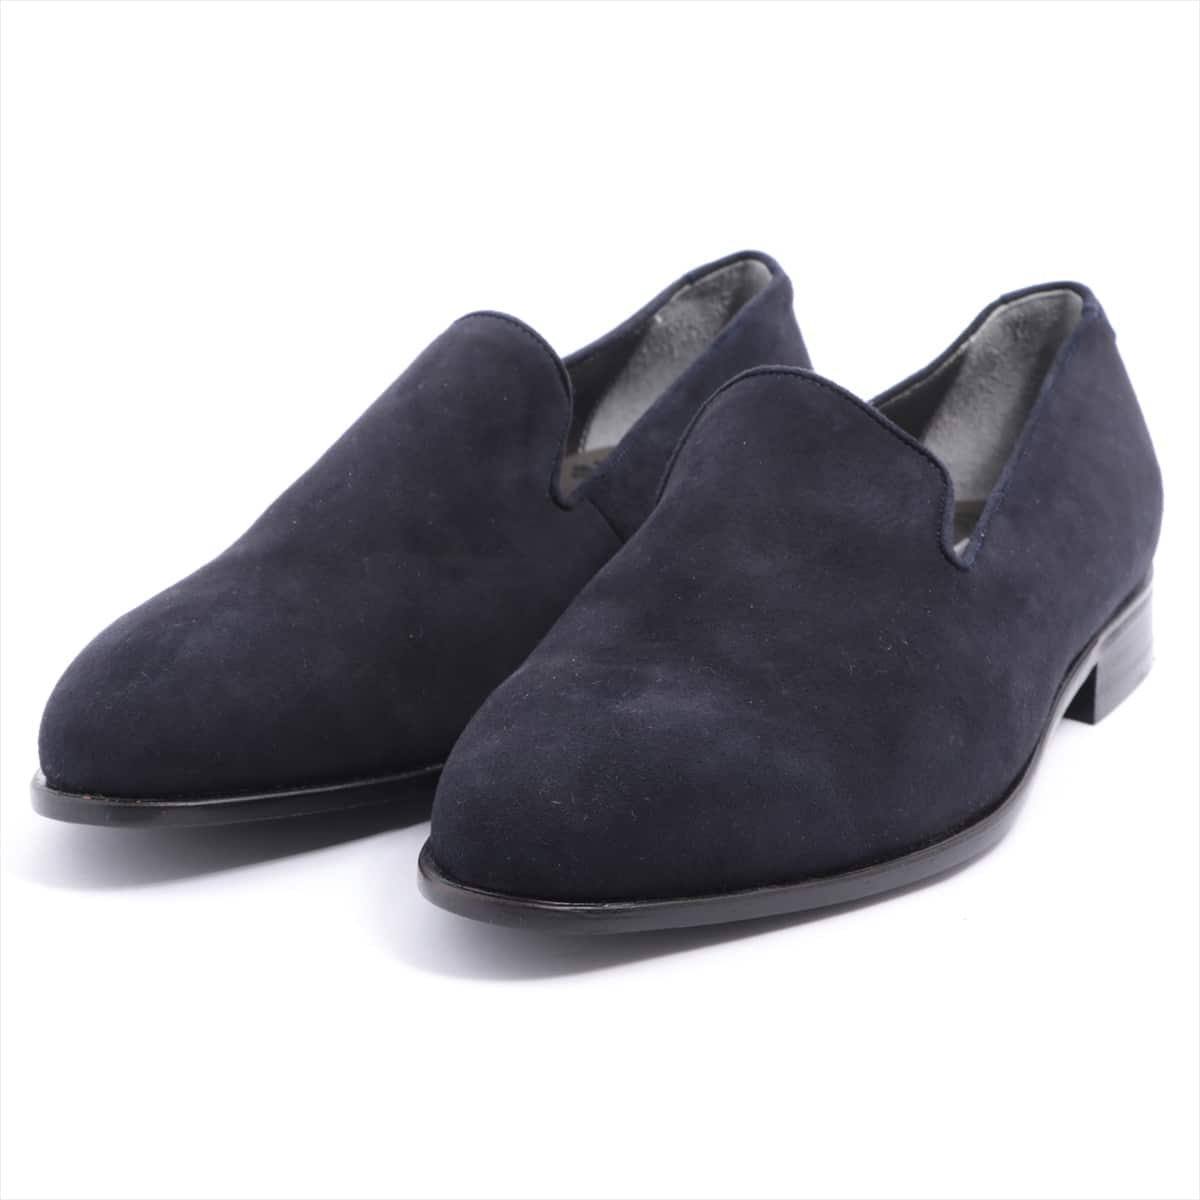 VERSACE Suede Leather shoes 42 Men's Navy blue Opera shoes